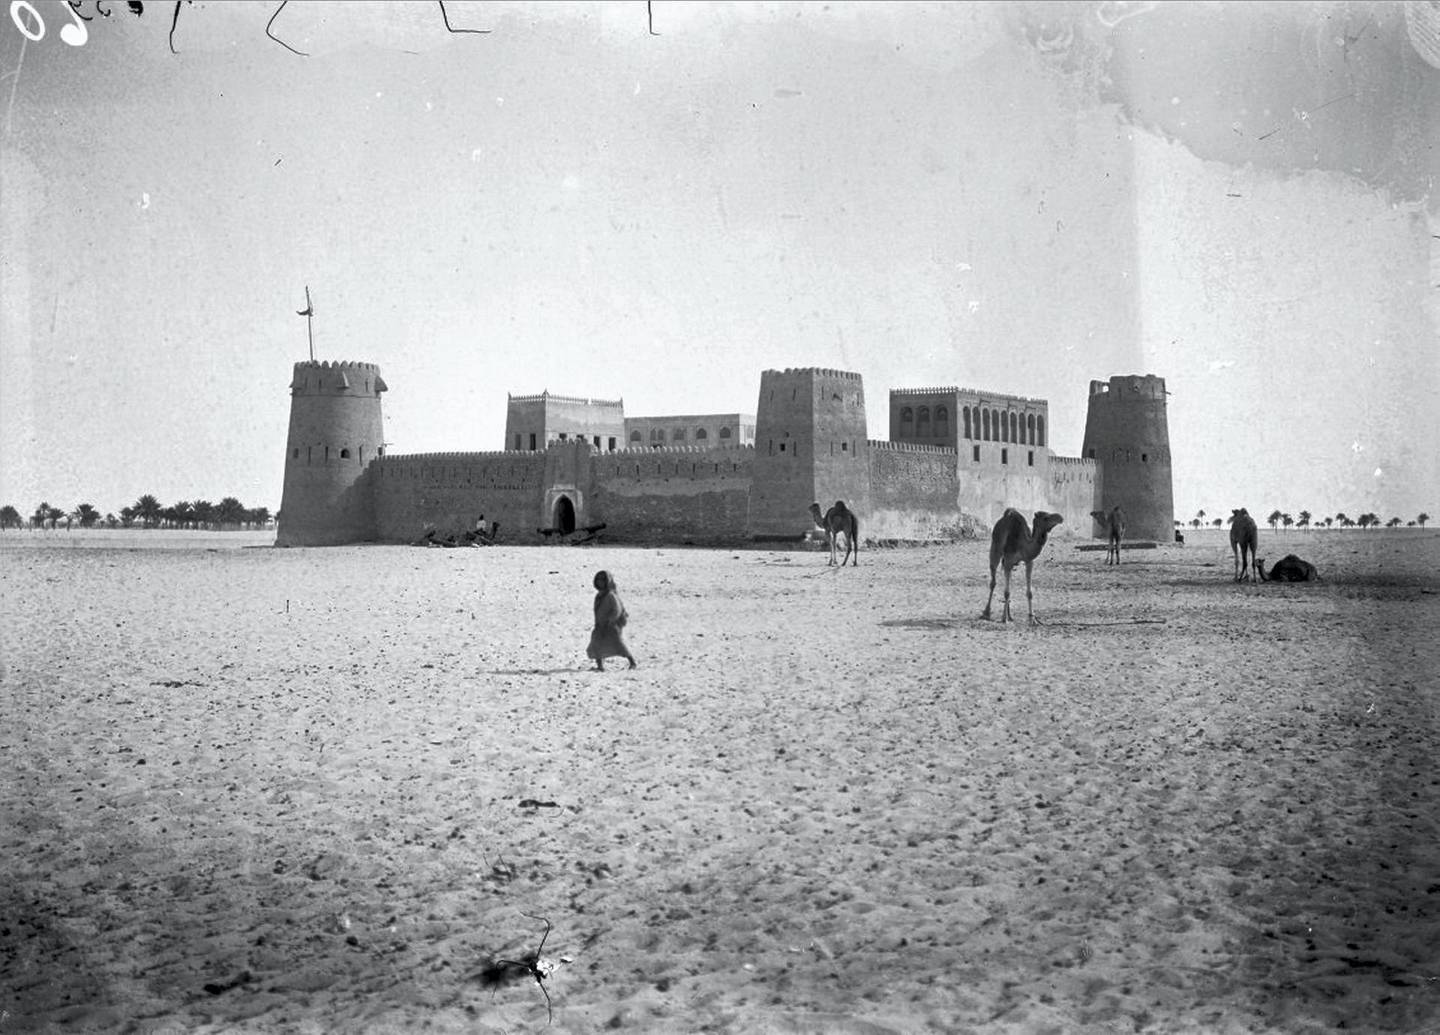 One of the earliest known photographs of Qasr Al Hosn from 1904. Courtesy: Ethnologisches Museum / Hermann Burchardt